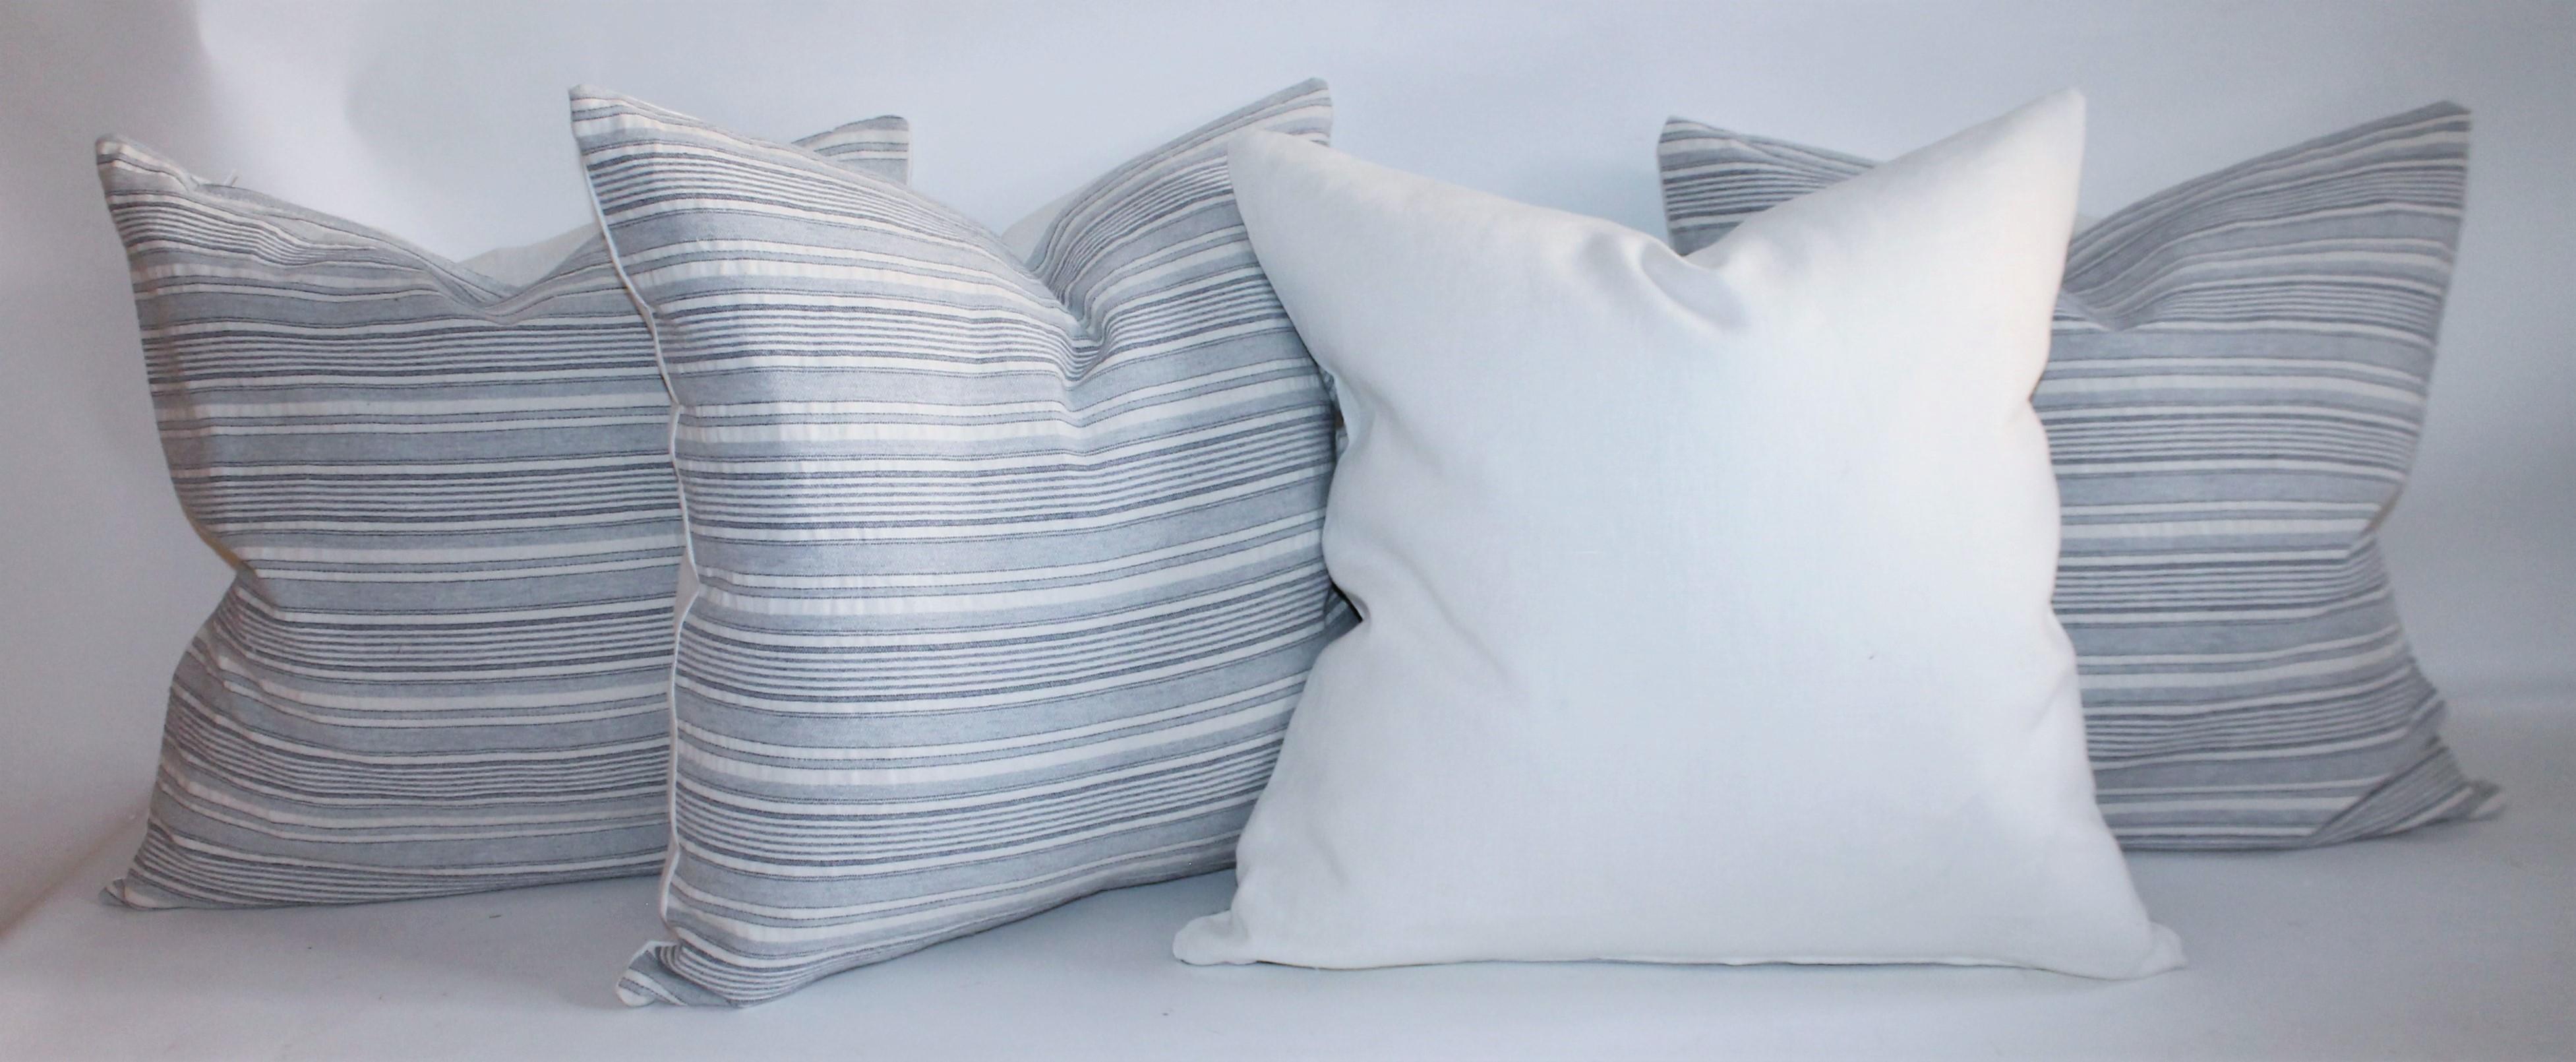 Vintage blue and white ticking pillows with white cotton linen backing. The inserts are down and feather fill. Selling the collection of four pillows.